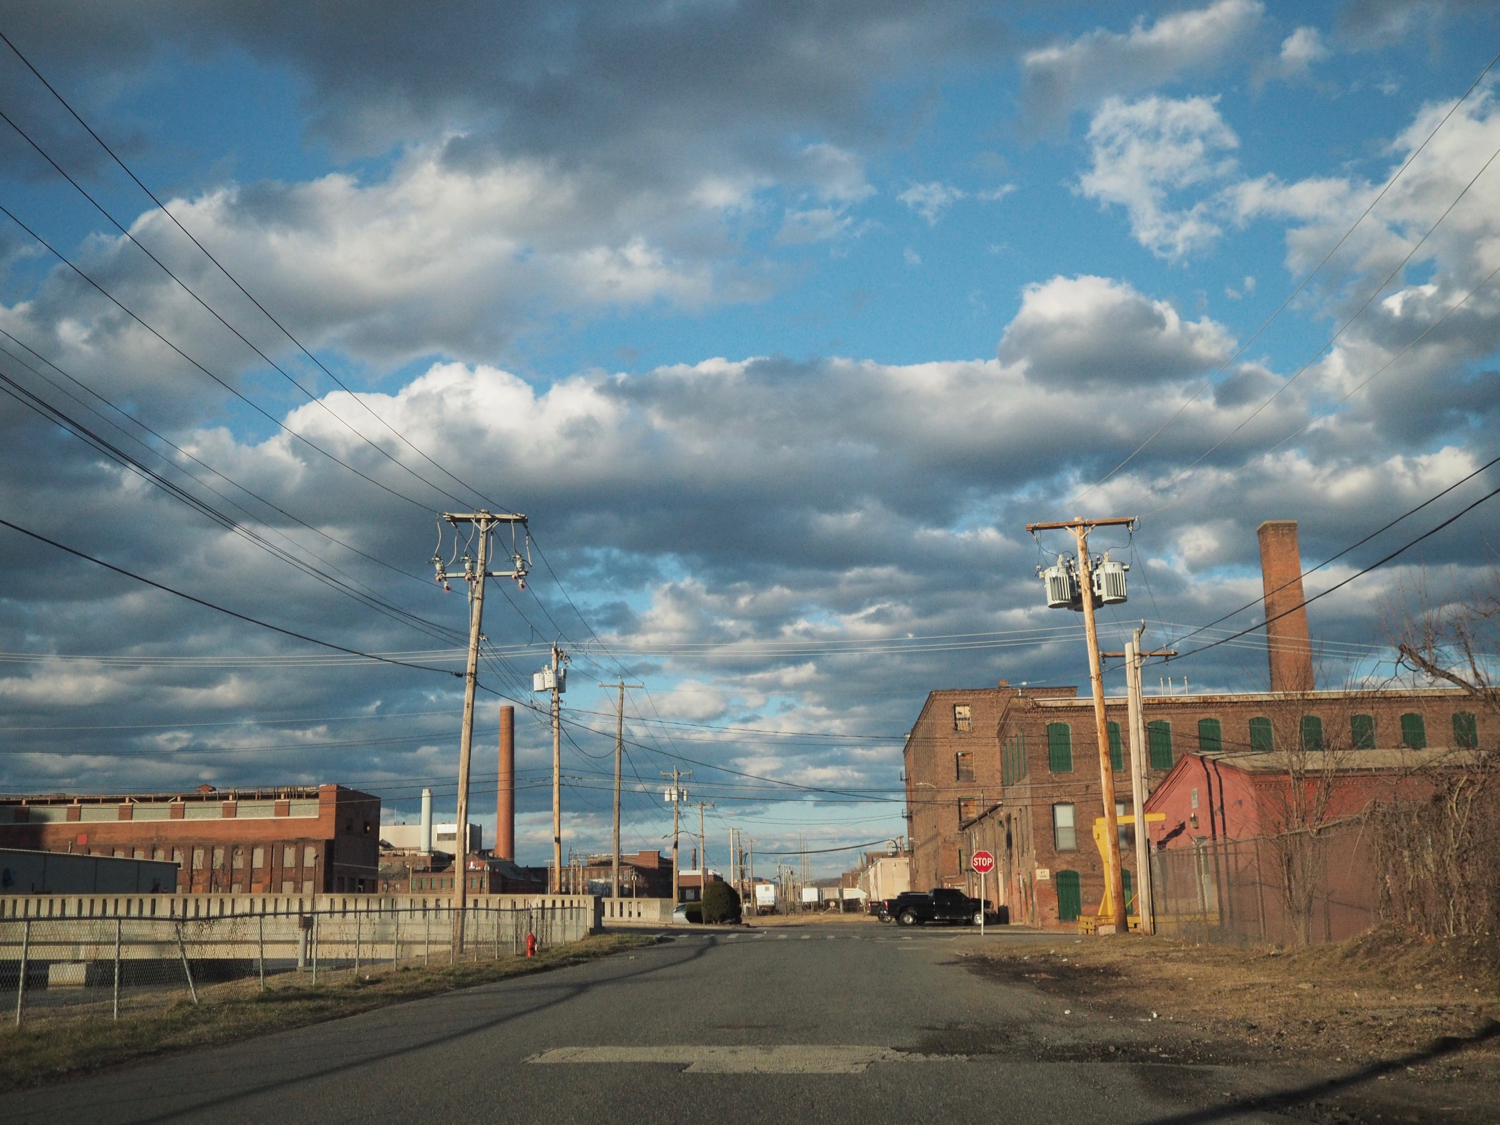 Clouds and wires over Holyoke — copyright Trace Meek